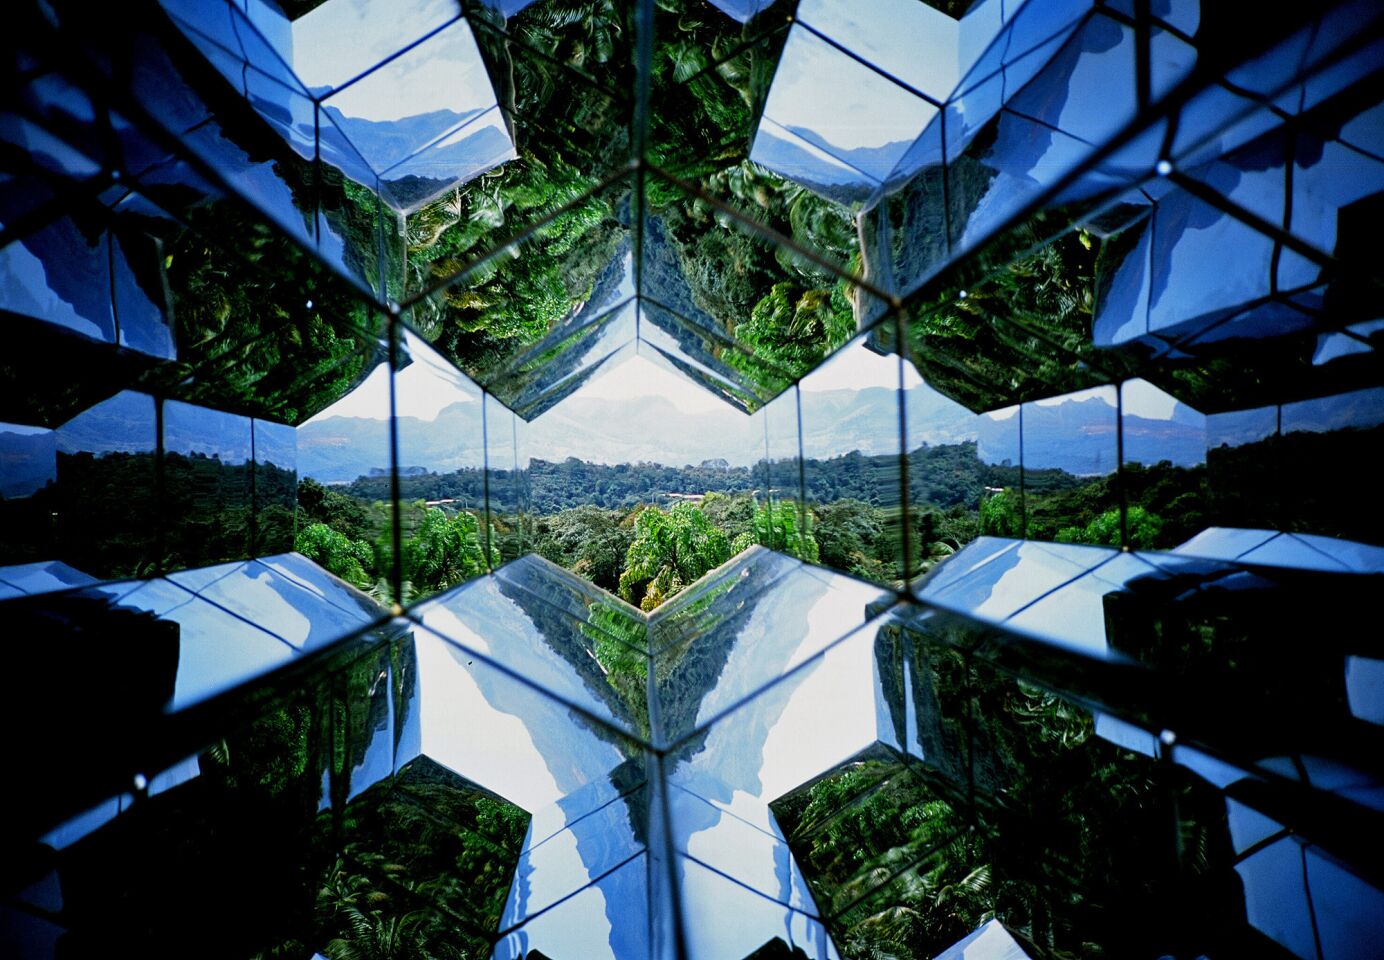 Olafur Eliasson's "Viewing Machine," an oversized kaleidoscope, allows visitors a fantastic view of the Inhotim museum gardens.